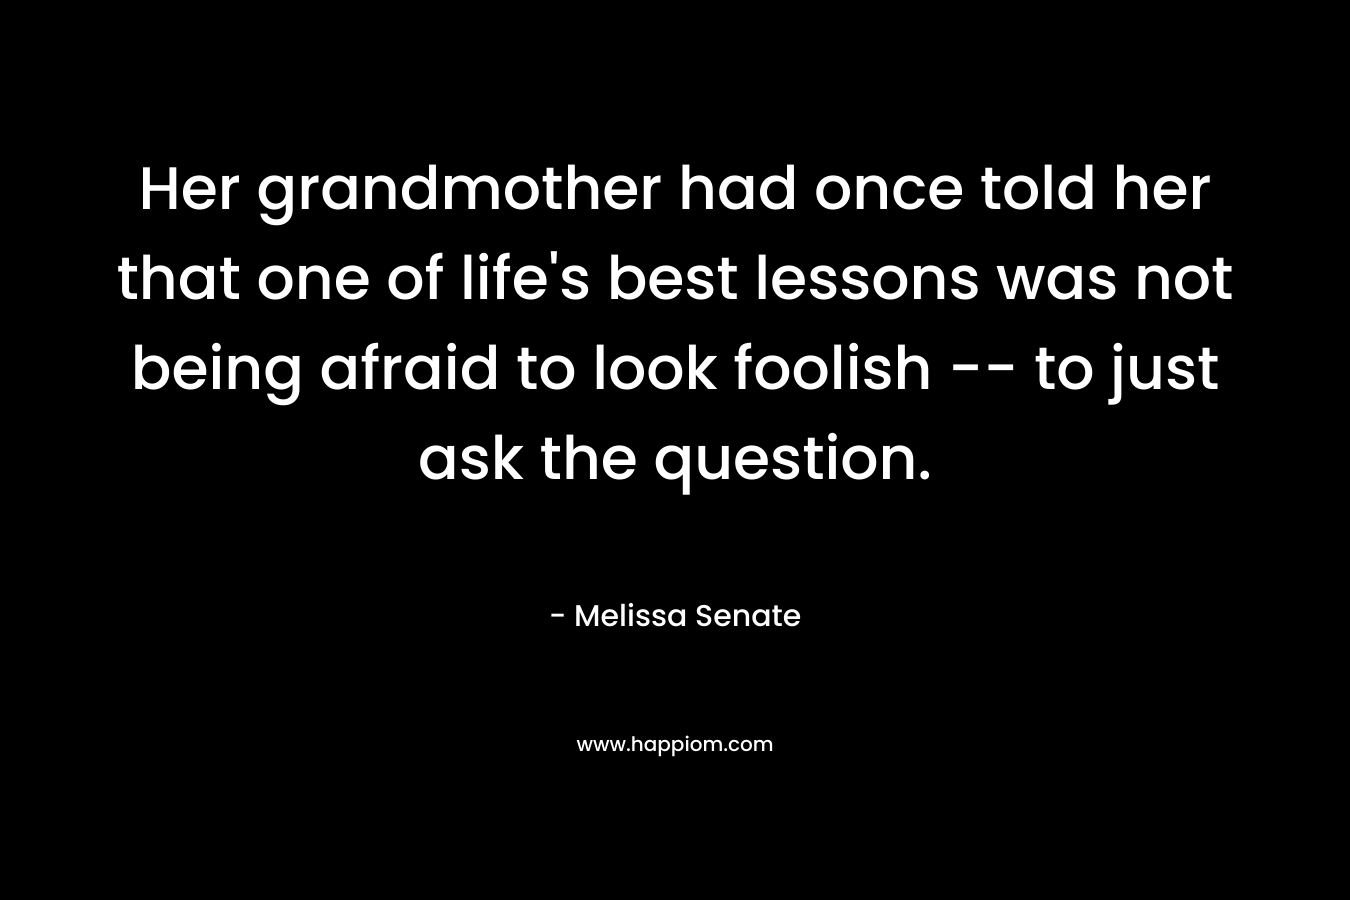 Her grandmother had once told her that one of life’s best lessons was not being afraid to look foolish — to just ask the question. – Melissa Senate